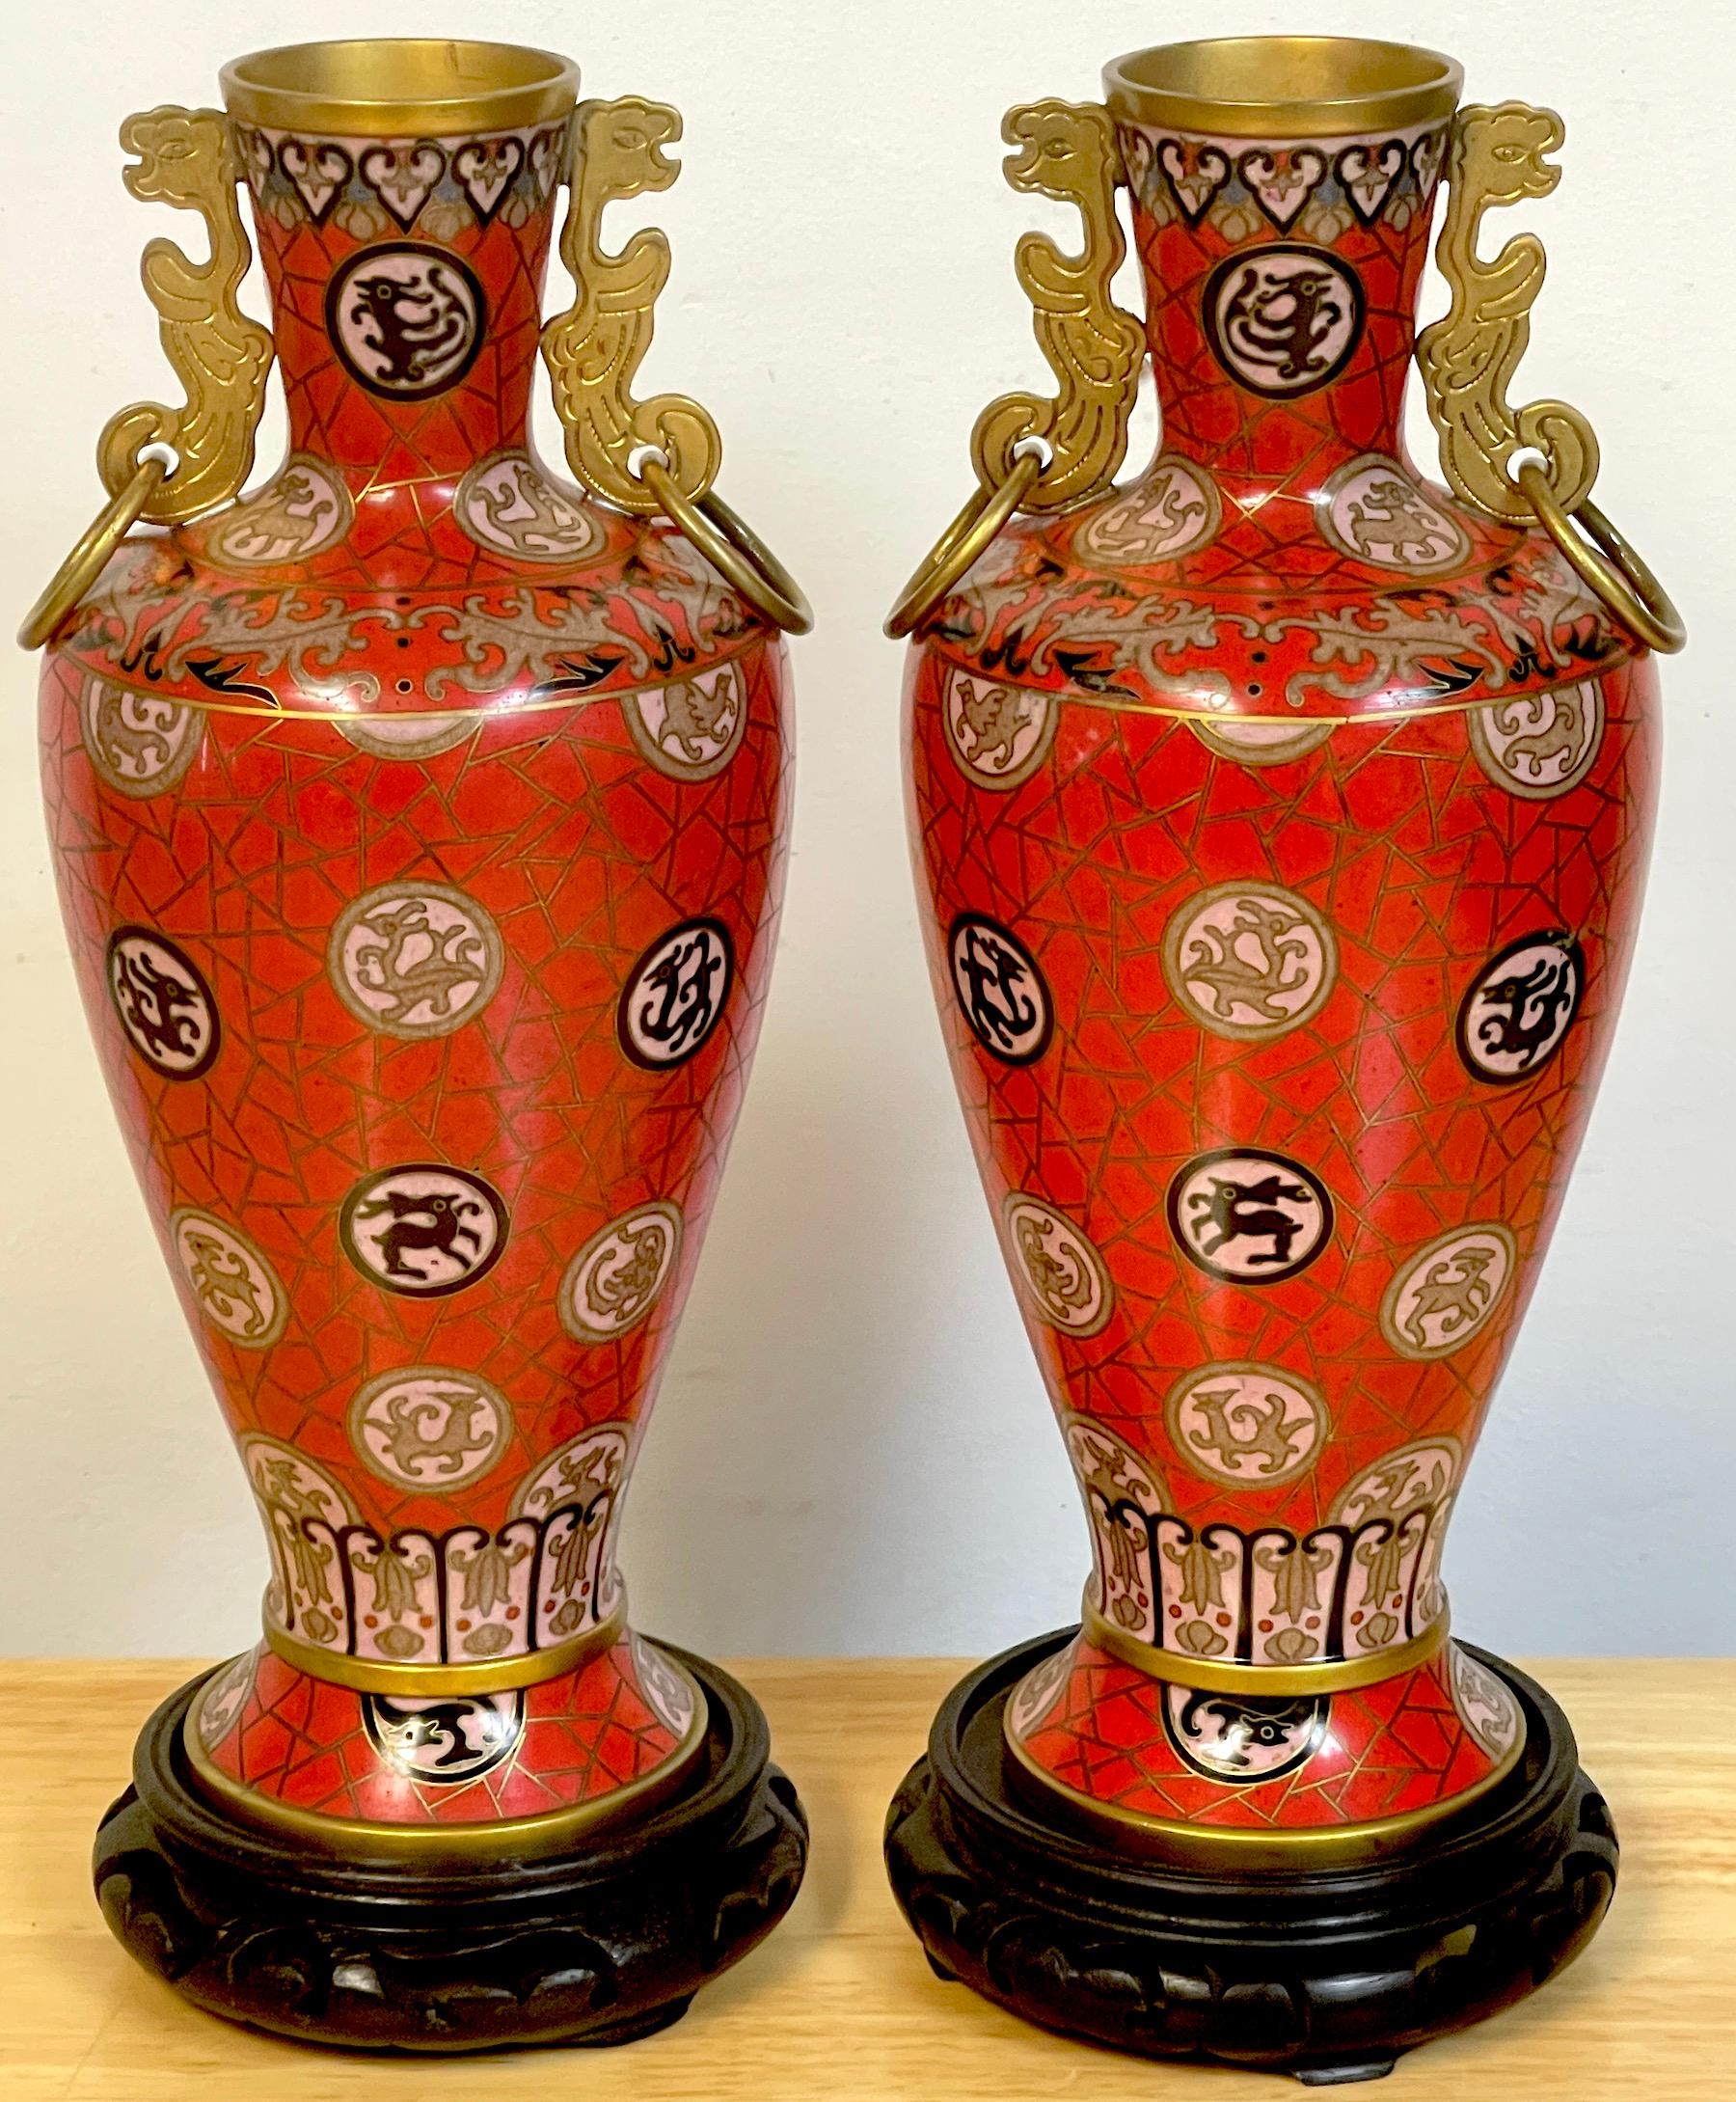 Pair of Chinese red cloisonné zodiac vases, with stands, each one with gilt brass phoenix bird ring handles, with 'cracked ice' and floating animal medallions. Complete with associated pair of carved hardwood stands. 
Unsigned 
Vase alone measures